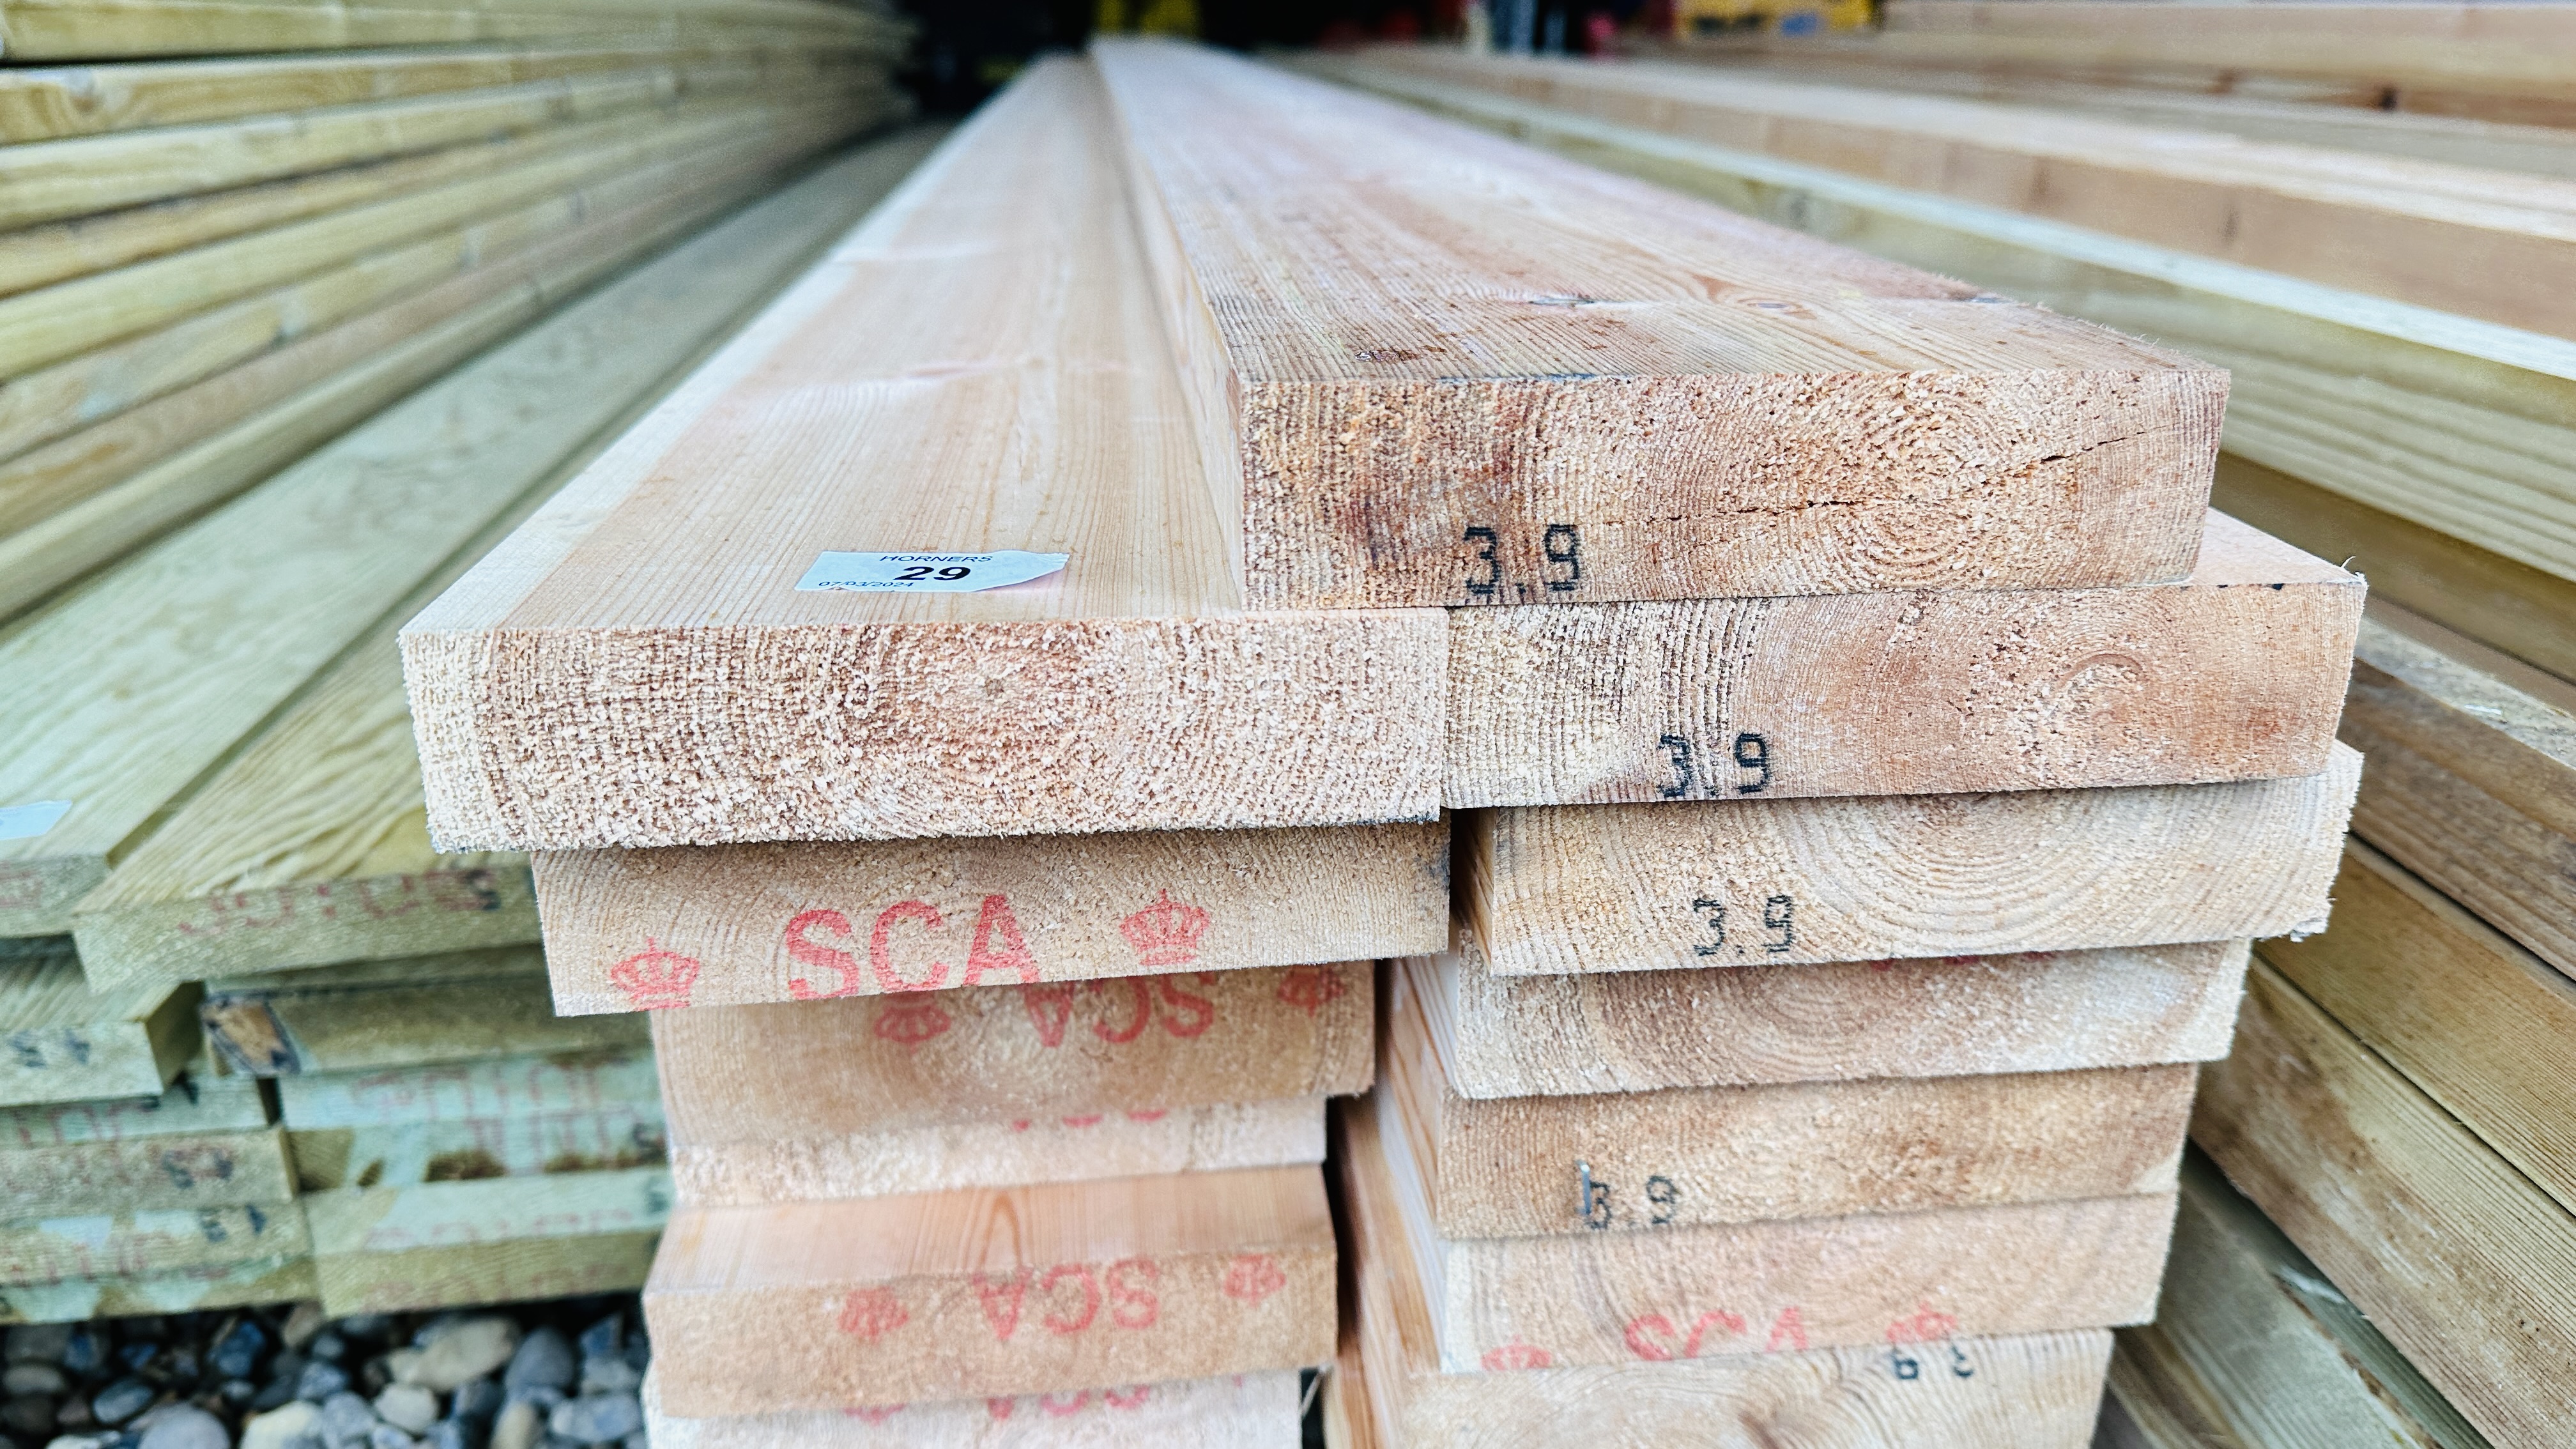 17 X 3.9 METRE LENGTH 145MM X 35MM PLANED TIMBER. THIS LOT IS SUBJECT TO VAT ON HAMMER PRICE. - Image 2 of 3